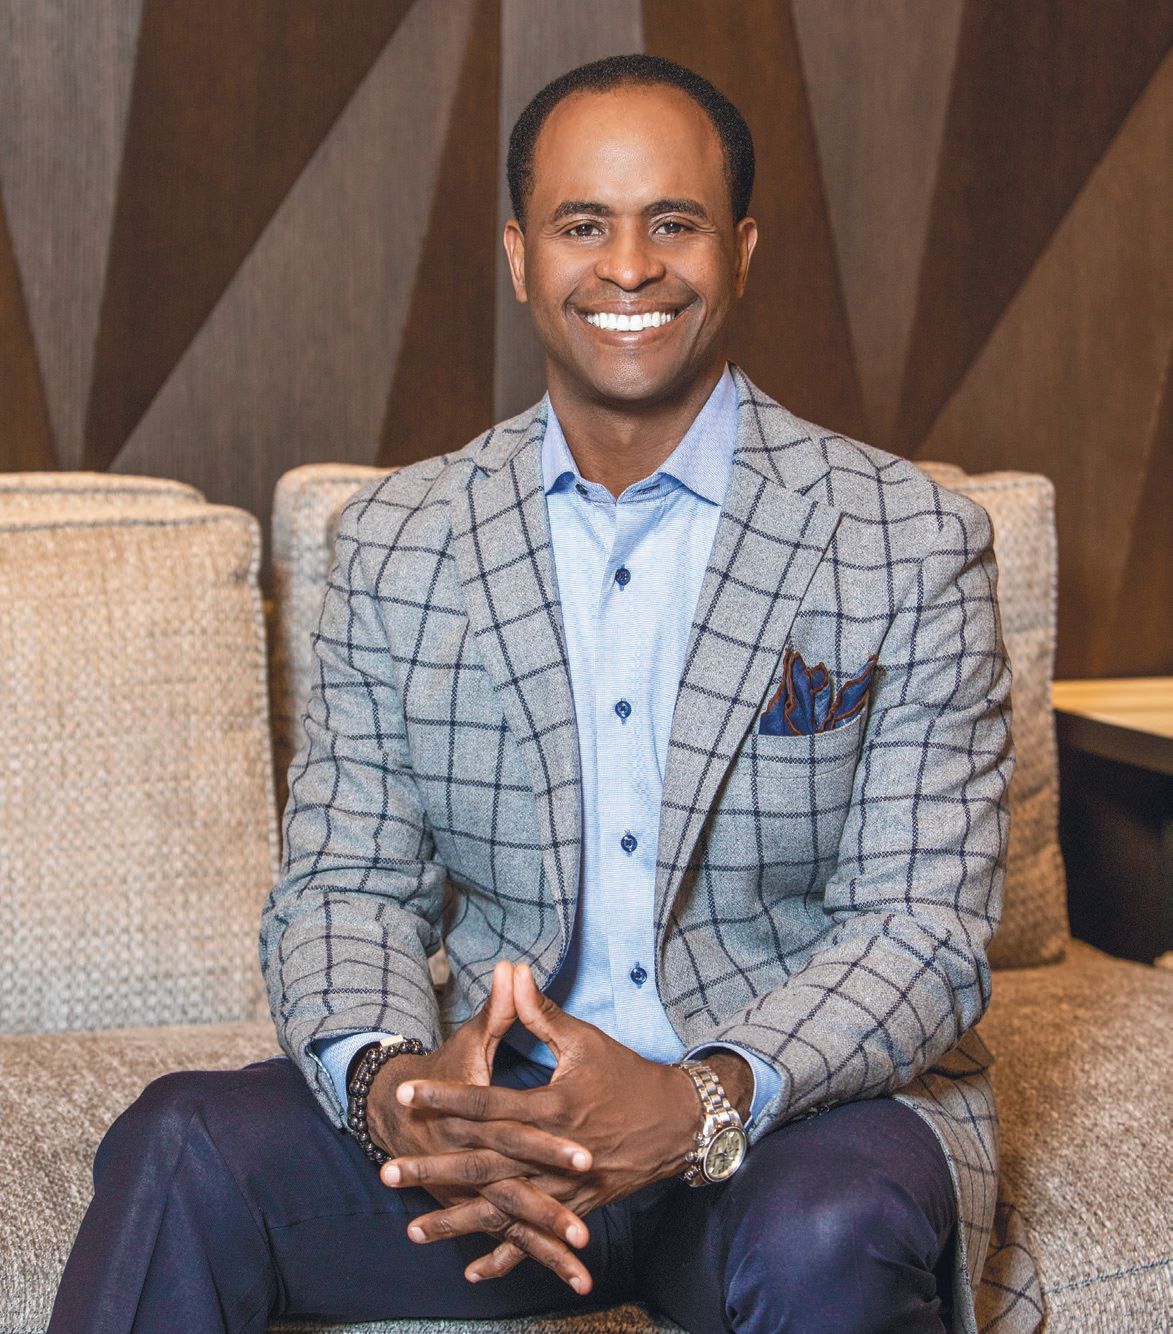 Wealth adviser Jesse Walton Jr. is also involved in various charities throughout the community including 100 Black Men of Atlanta Inc. PHOTO: BY RASHUN HAYES/FOCUS MINDED PHOTOGRAPHY